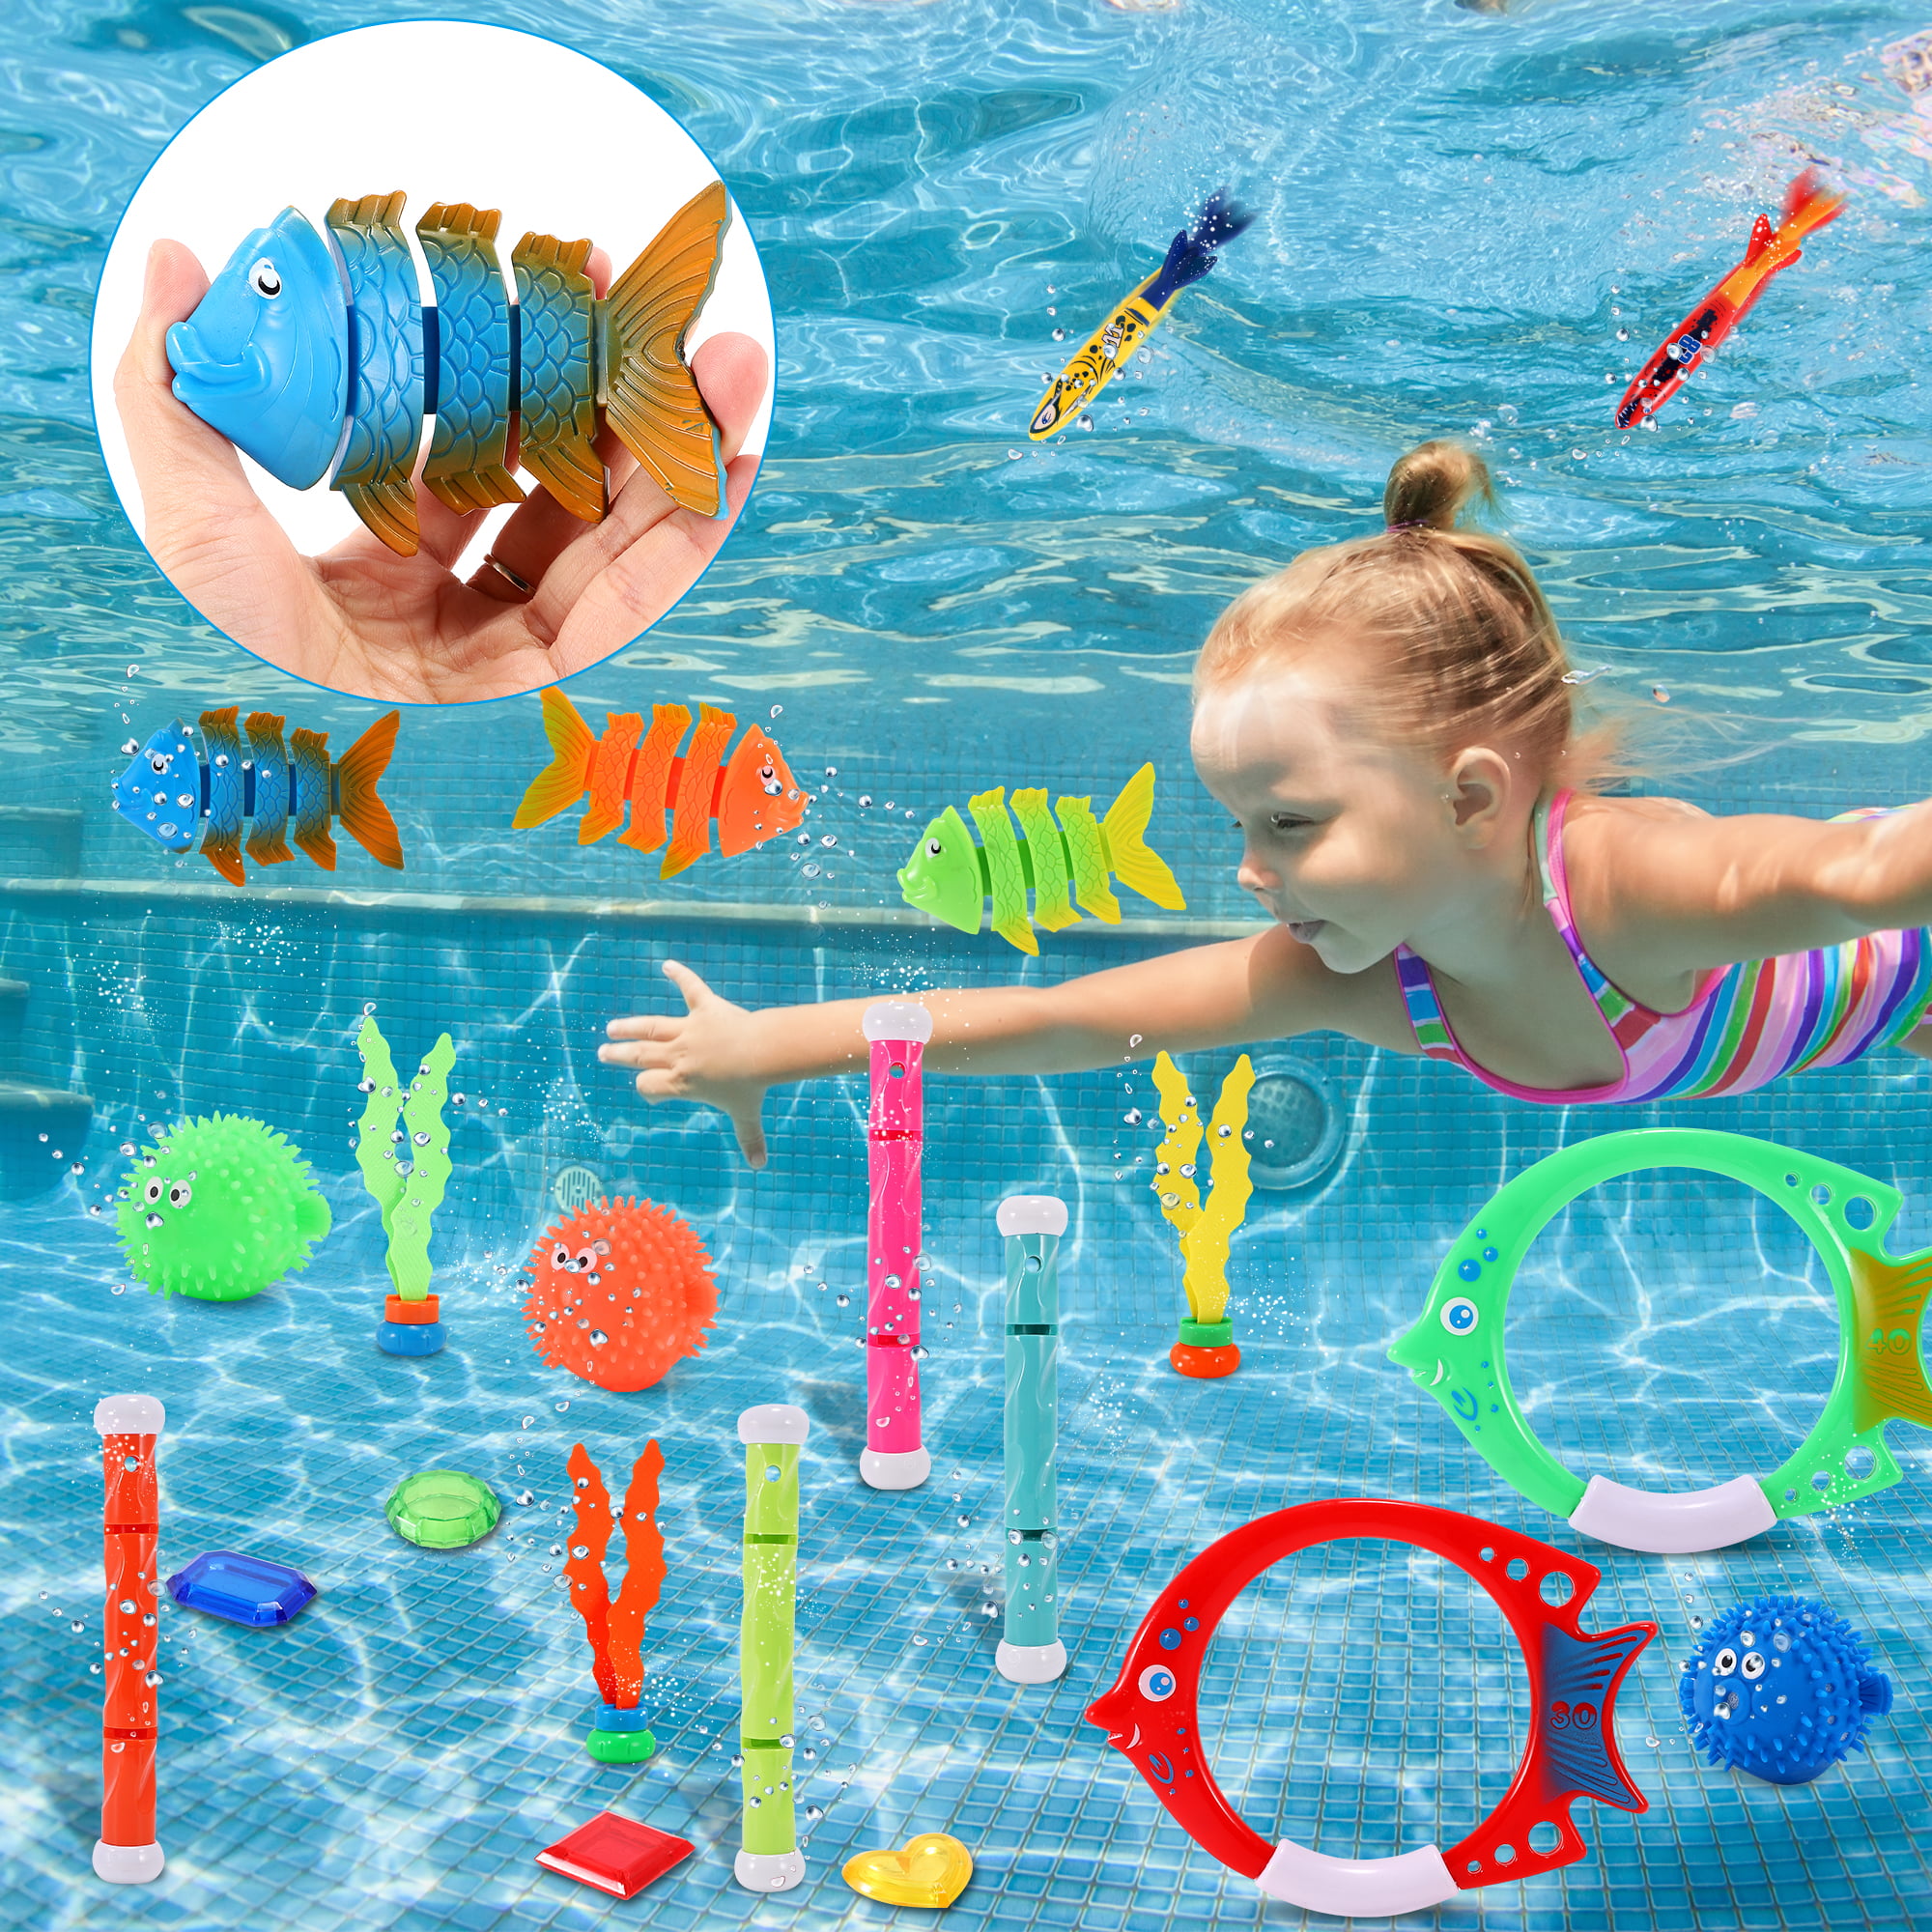 Swimming Pool Toys Underwater for Kids 3 Diving Rings 4 Diving Sticks 4 Torpedo Pool Toys 3 Sea Grass 3 Diving Fishes 3 Globefish and 6 gems Storage Bag Included FiGoal 26 PCs Diving Toy Set 